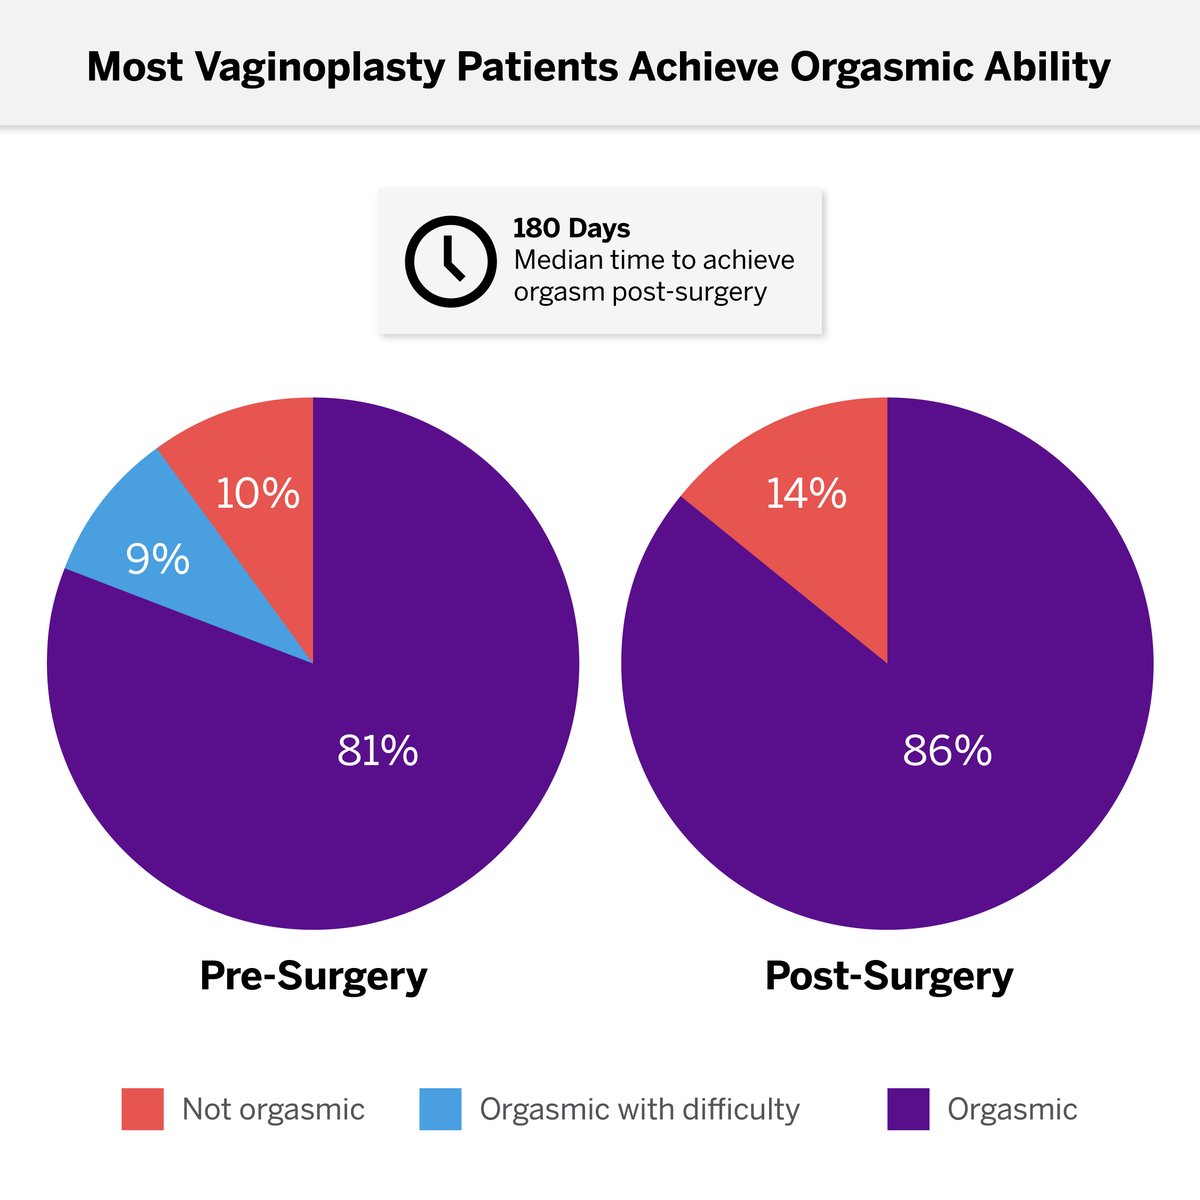 NYU Langone's transgender reconstructive surgery team co-led by @lee_c_zhao has completed >500 gender-affirming surgeries. A recent study finds most patients undergoing robotic peritoneal flap vaginoplasty here achieve orgasm in a year. #Pride For more: bit.ly/3KlUUvD